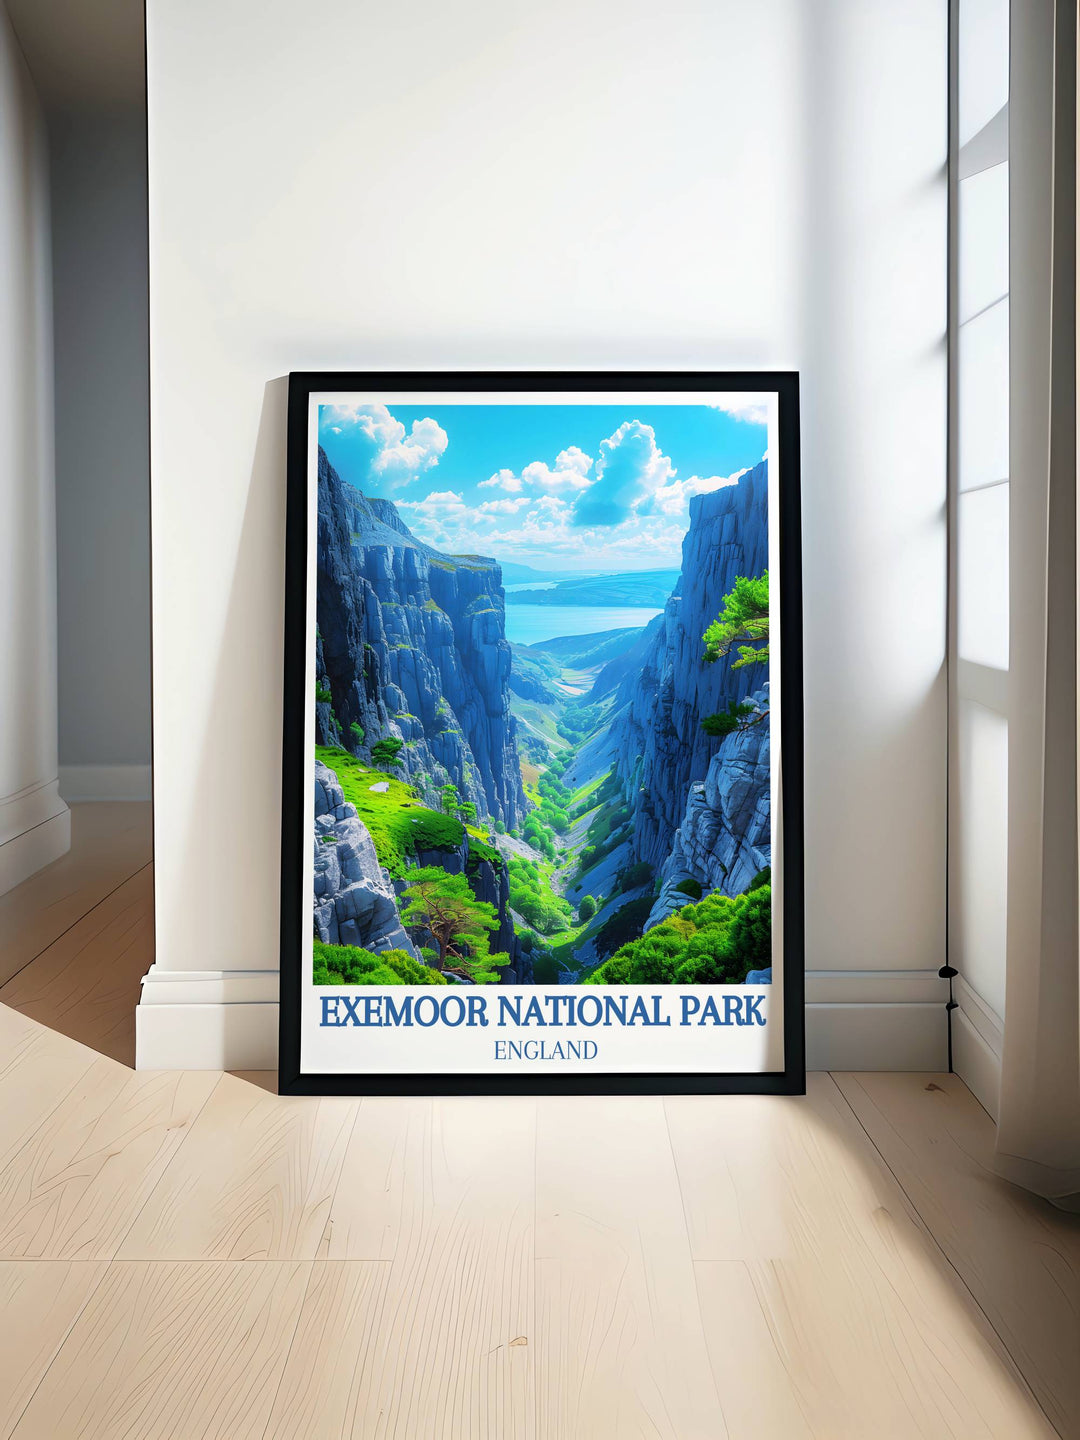  Valley of the Rocks depicted in fine detail, showing the rugged cliffs and natural stone formations in a stunning art print.